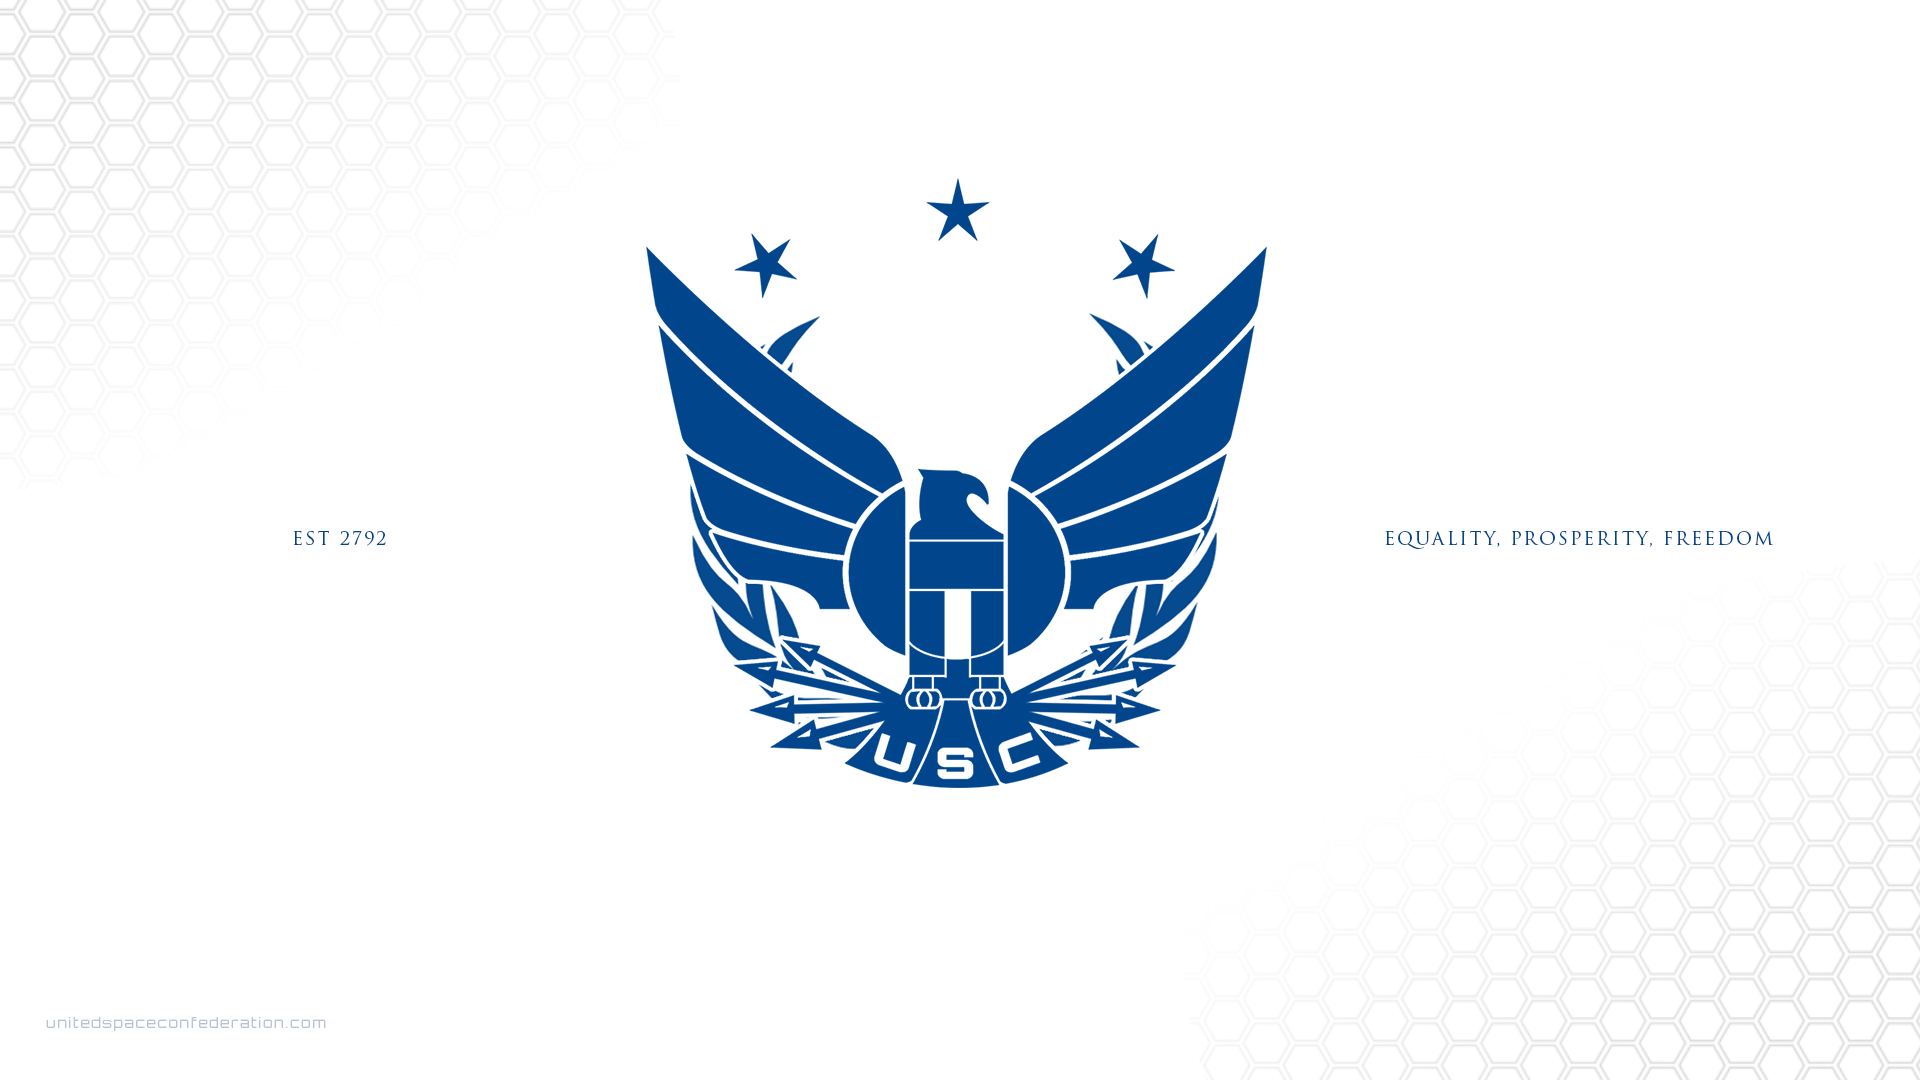 General 1920x1080 Star Citizen United Space Confederation simple background video games PC gaming white background